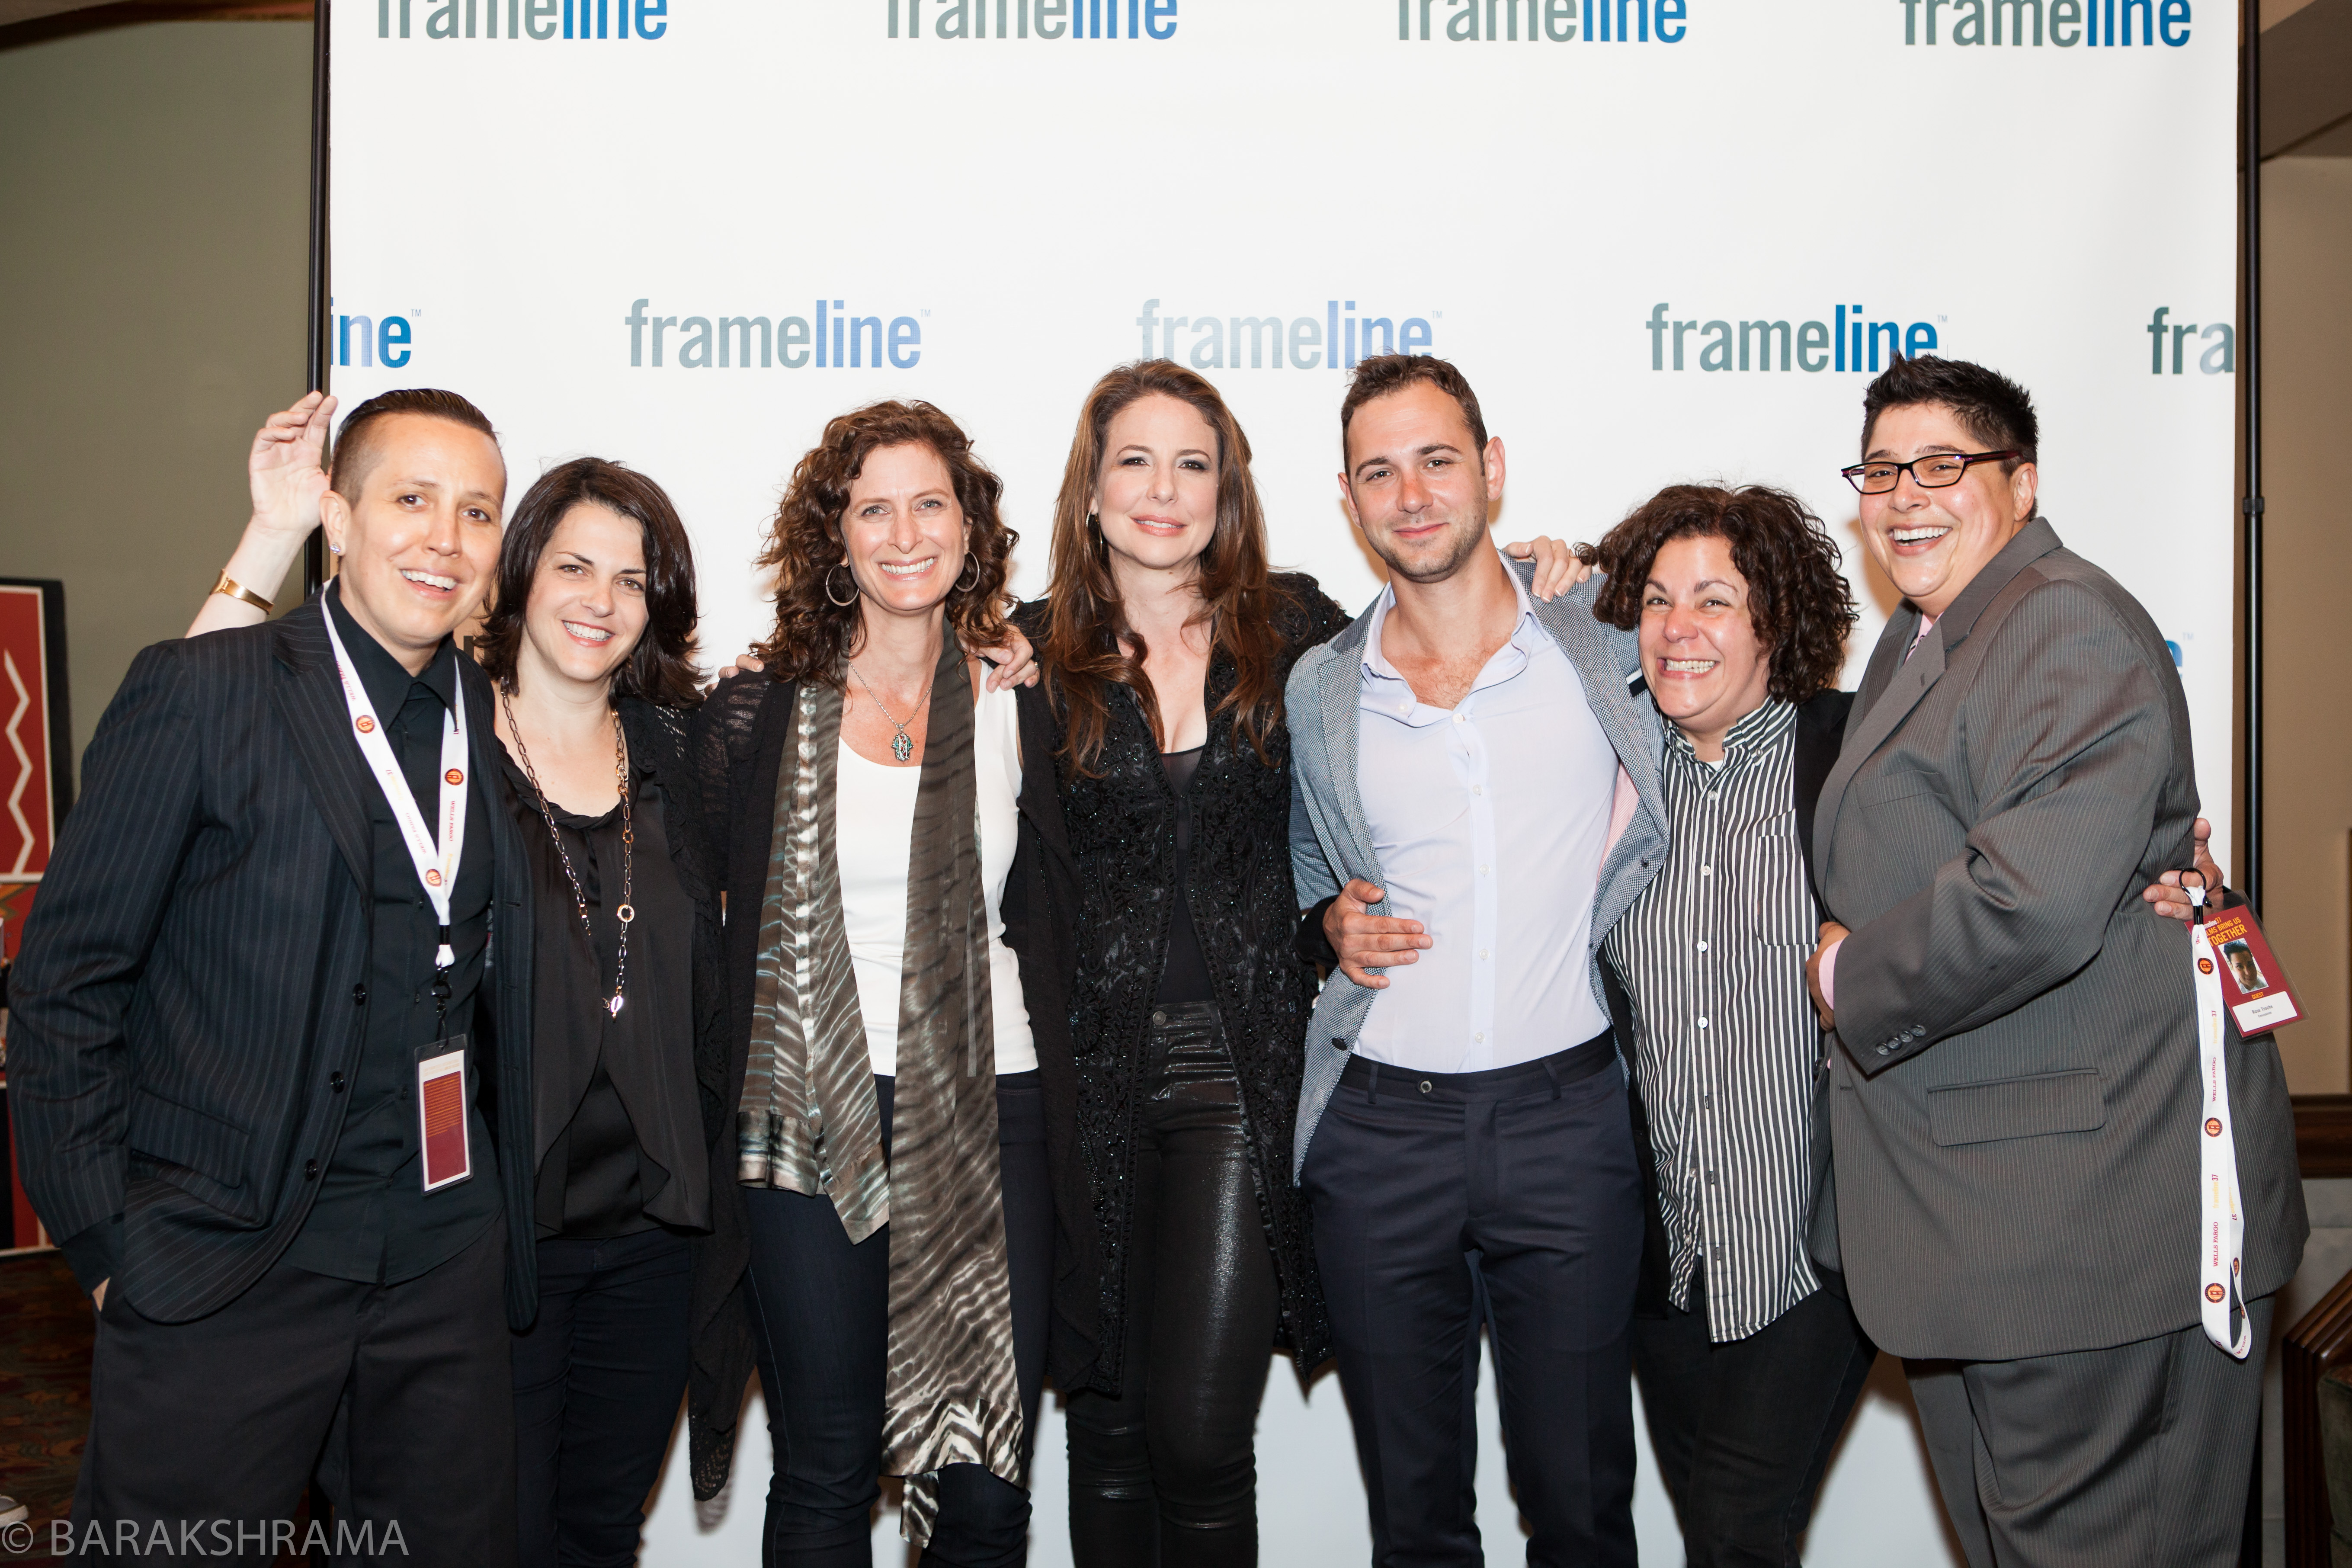 on the red carpet - Frameline37 Opening Night Barb Morrison, Stacie Passon, Julie Fain Lawrence, Robin Weigert, Johnathan Tchaikovsky, Rose Troche, Des Buford